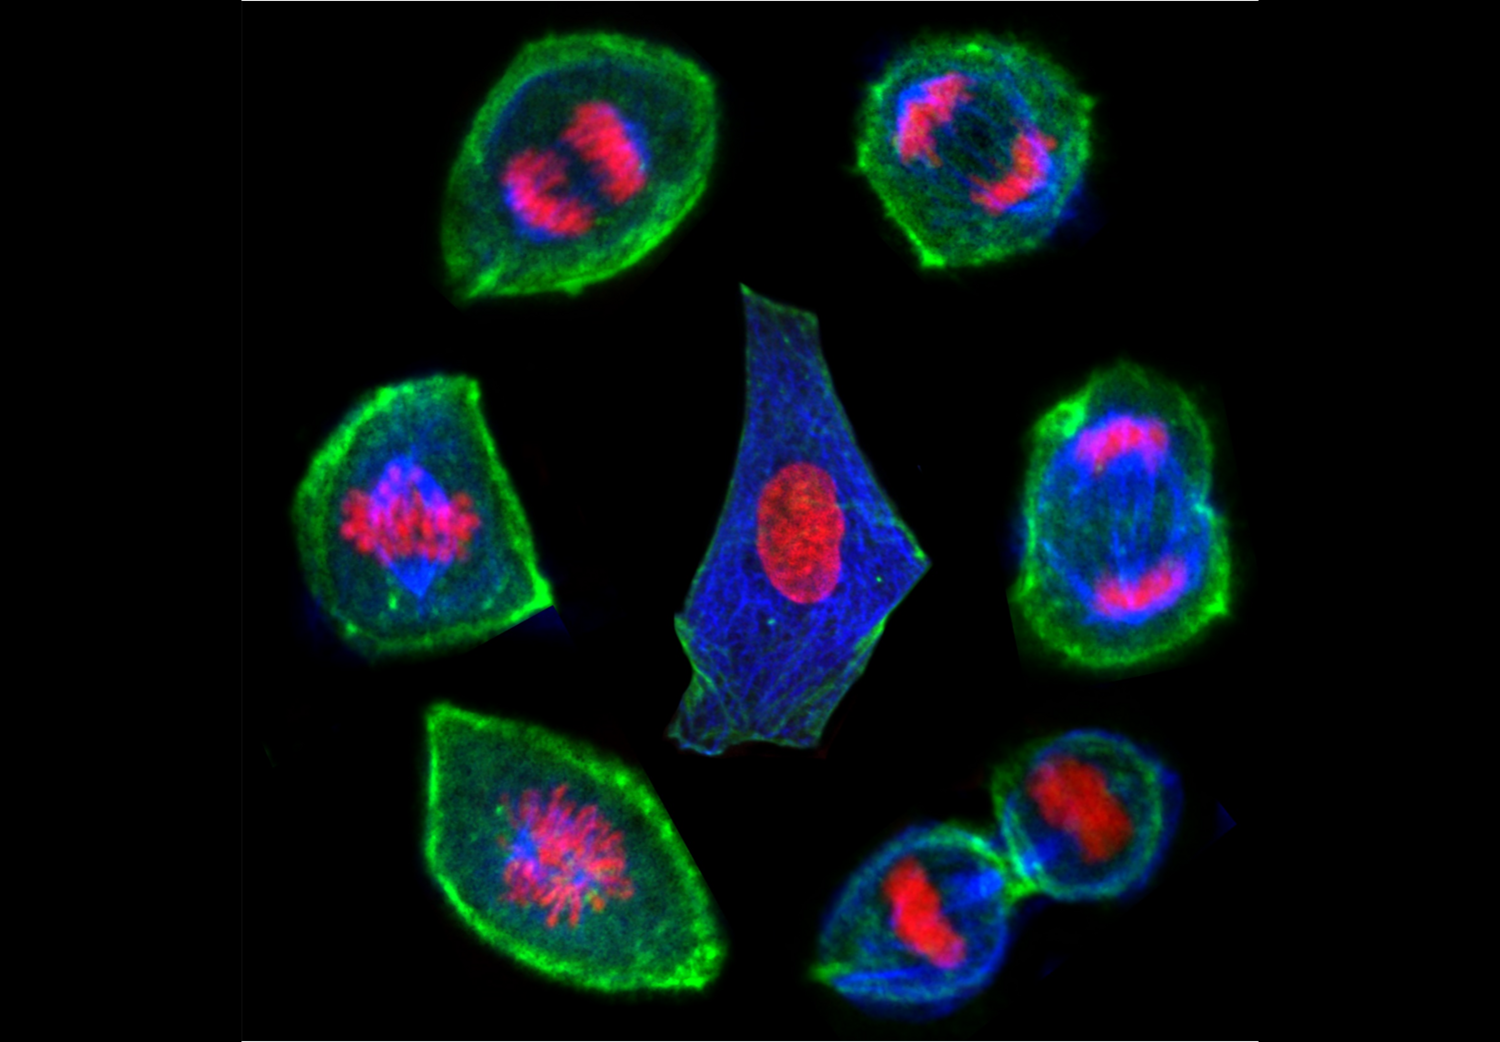 Lifecycle of a biological cell: cell (in centre) before mitosis (cell division) takes place. From bottom left and then clockwise: the cells become rounder and the shell thickens as the insides of the cell change - soften and fluidify. The genetic material is shared out to create two new daughter cells. (Image taken with a confocal microscope, research carried out using optical tweezers)